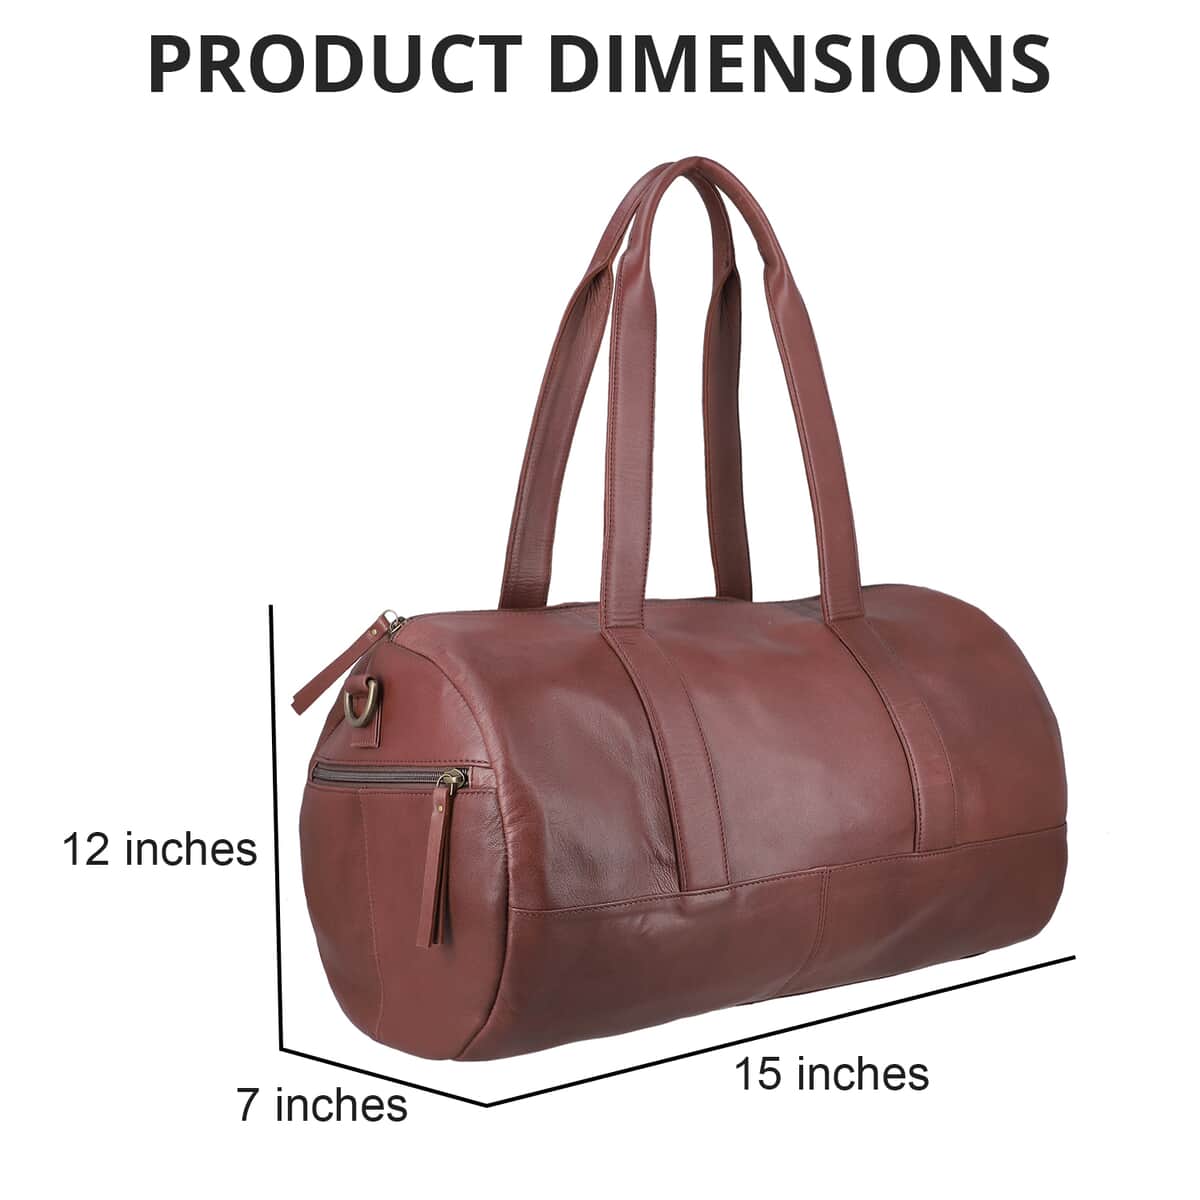 "100% Genuine Vintage Leather Duffle Bag, Color: Dark Brown, Size : 15L x 9.75HX10W inch" image number 4